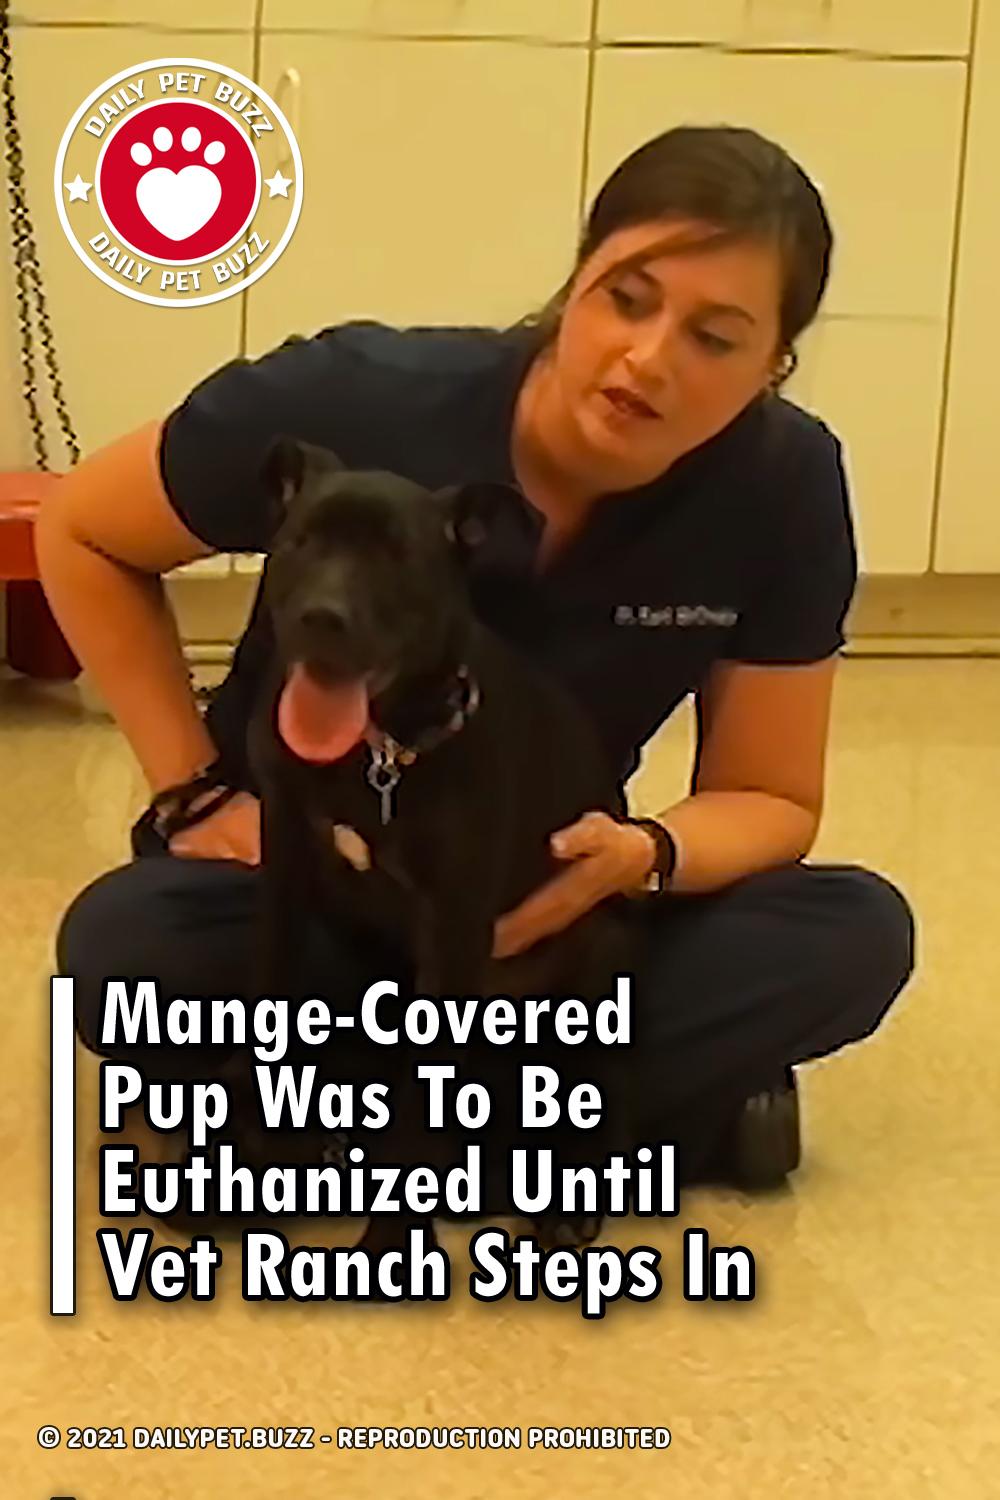 Mange-Covered Pup Was To Be Euthanized Until Vet Ranch Steps In